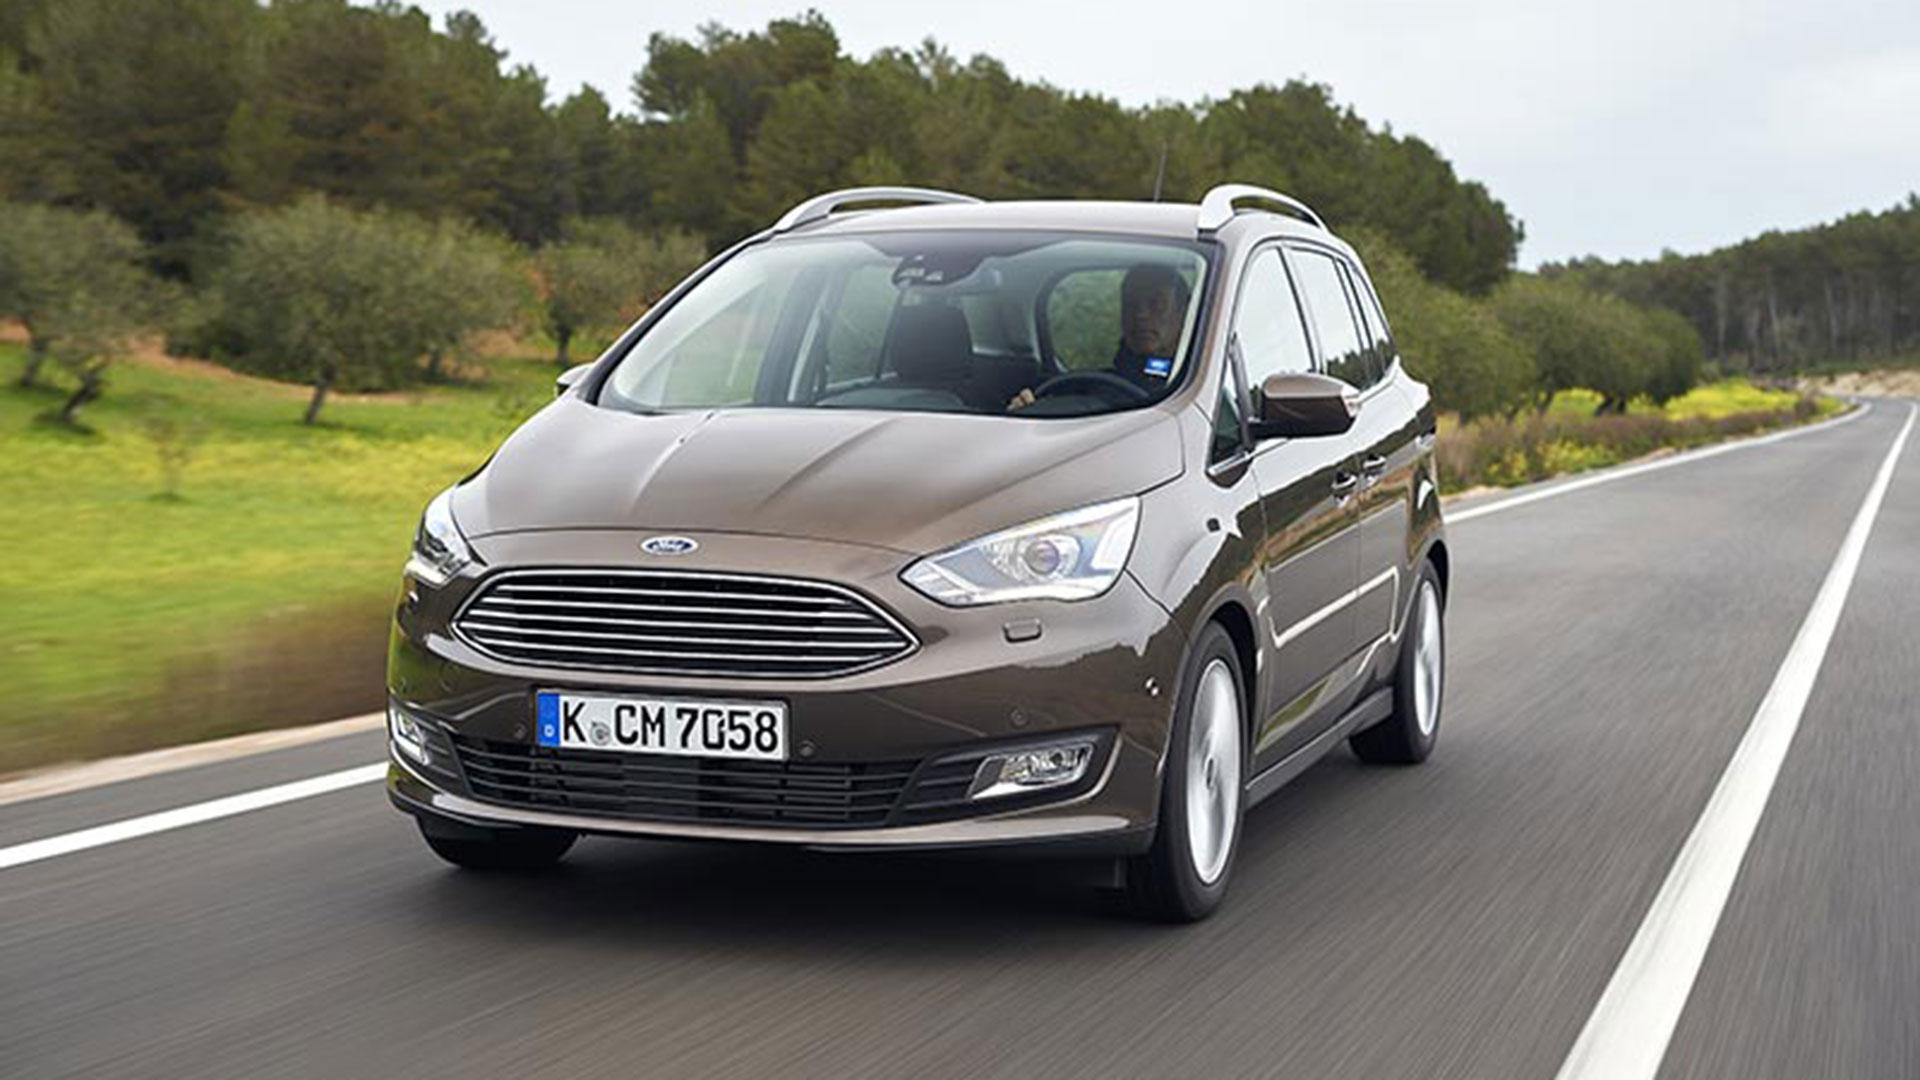 7 Seater Ford Grand C-Max cars for sale | AutoTrader UK